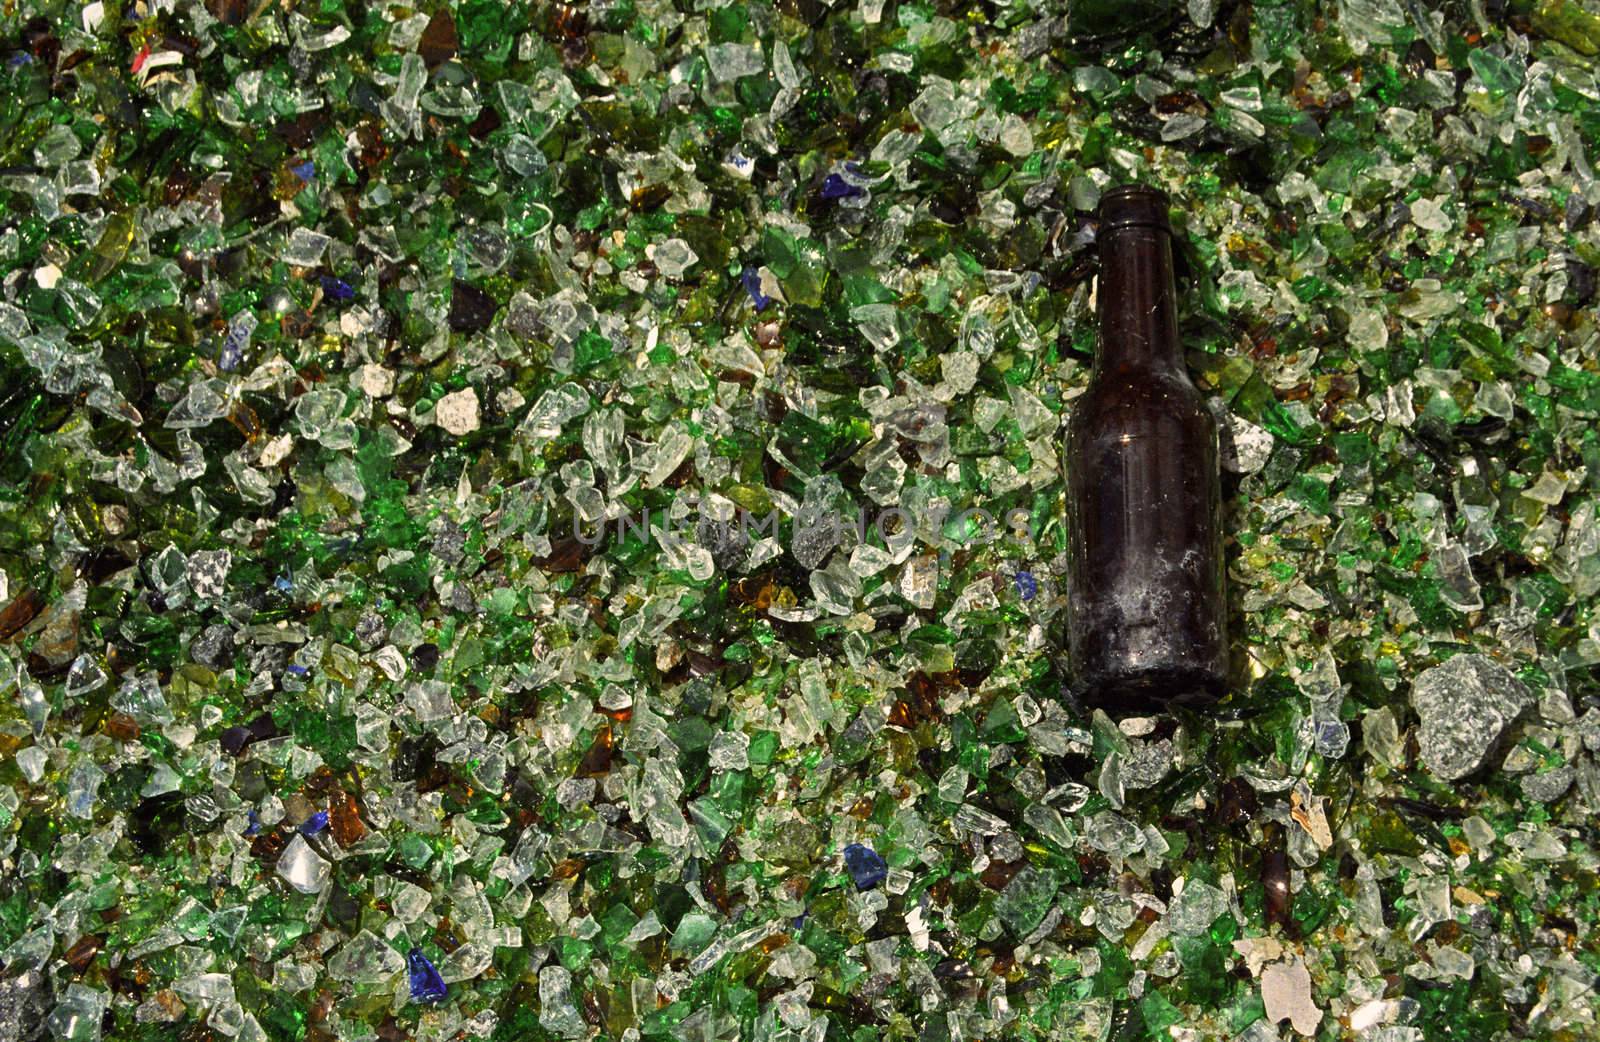 Bottle that evaded crushing in a glass recycling centre